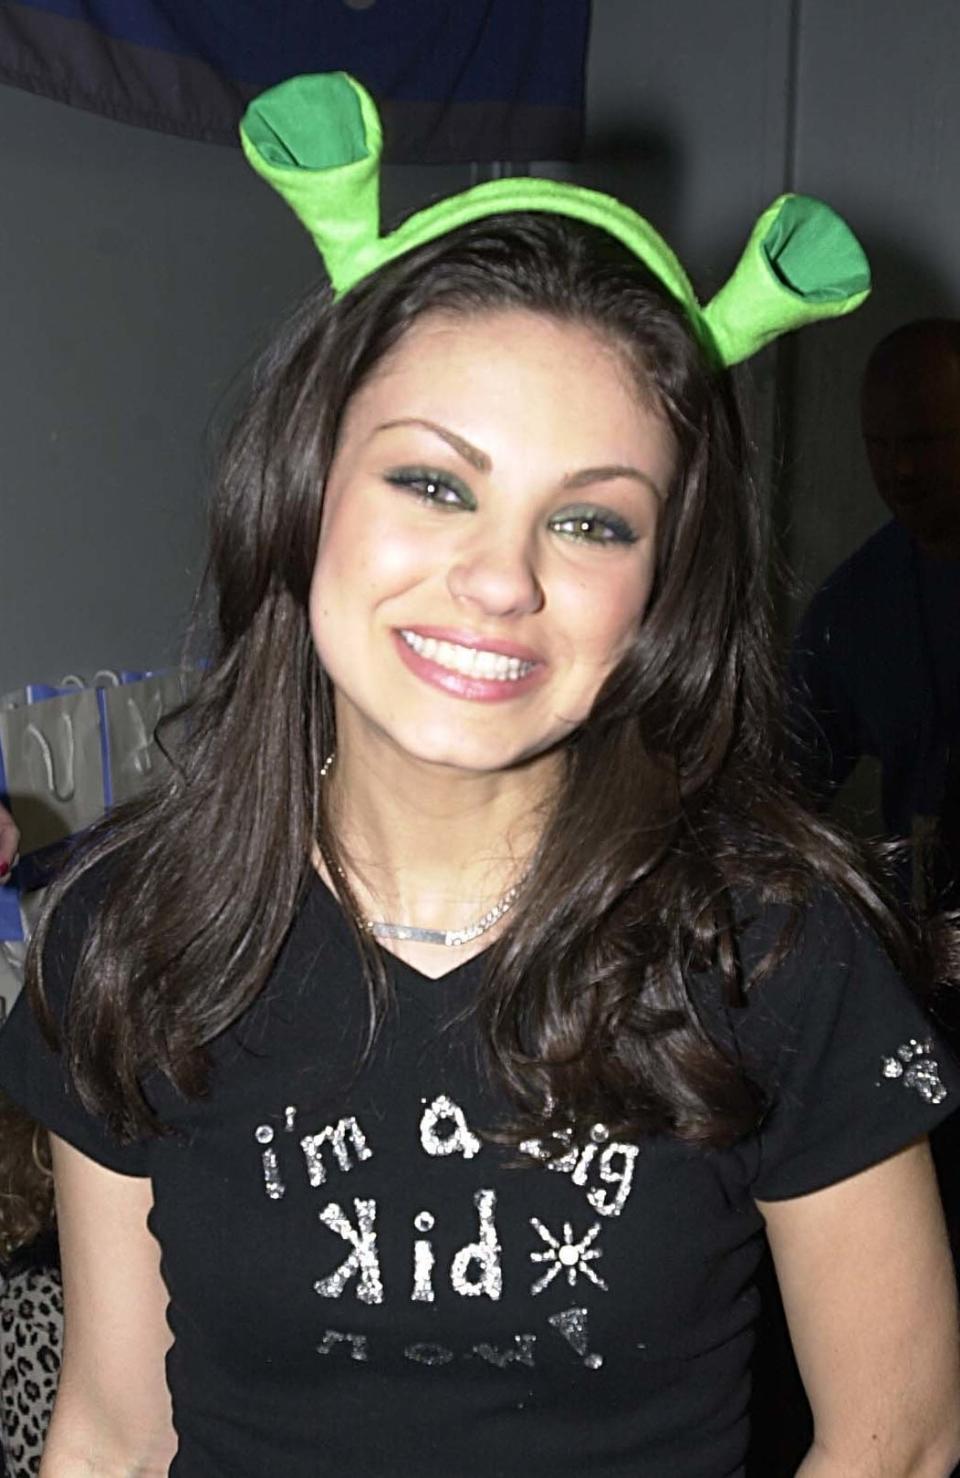 Close-up of Mila smiling and wearing a "I'm a big kid" T-shirt